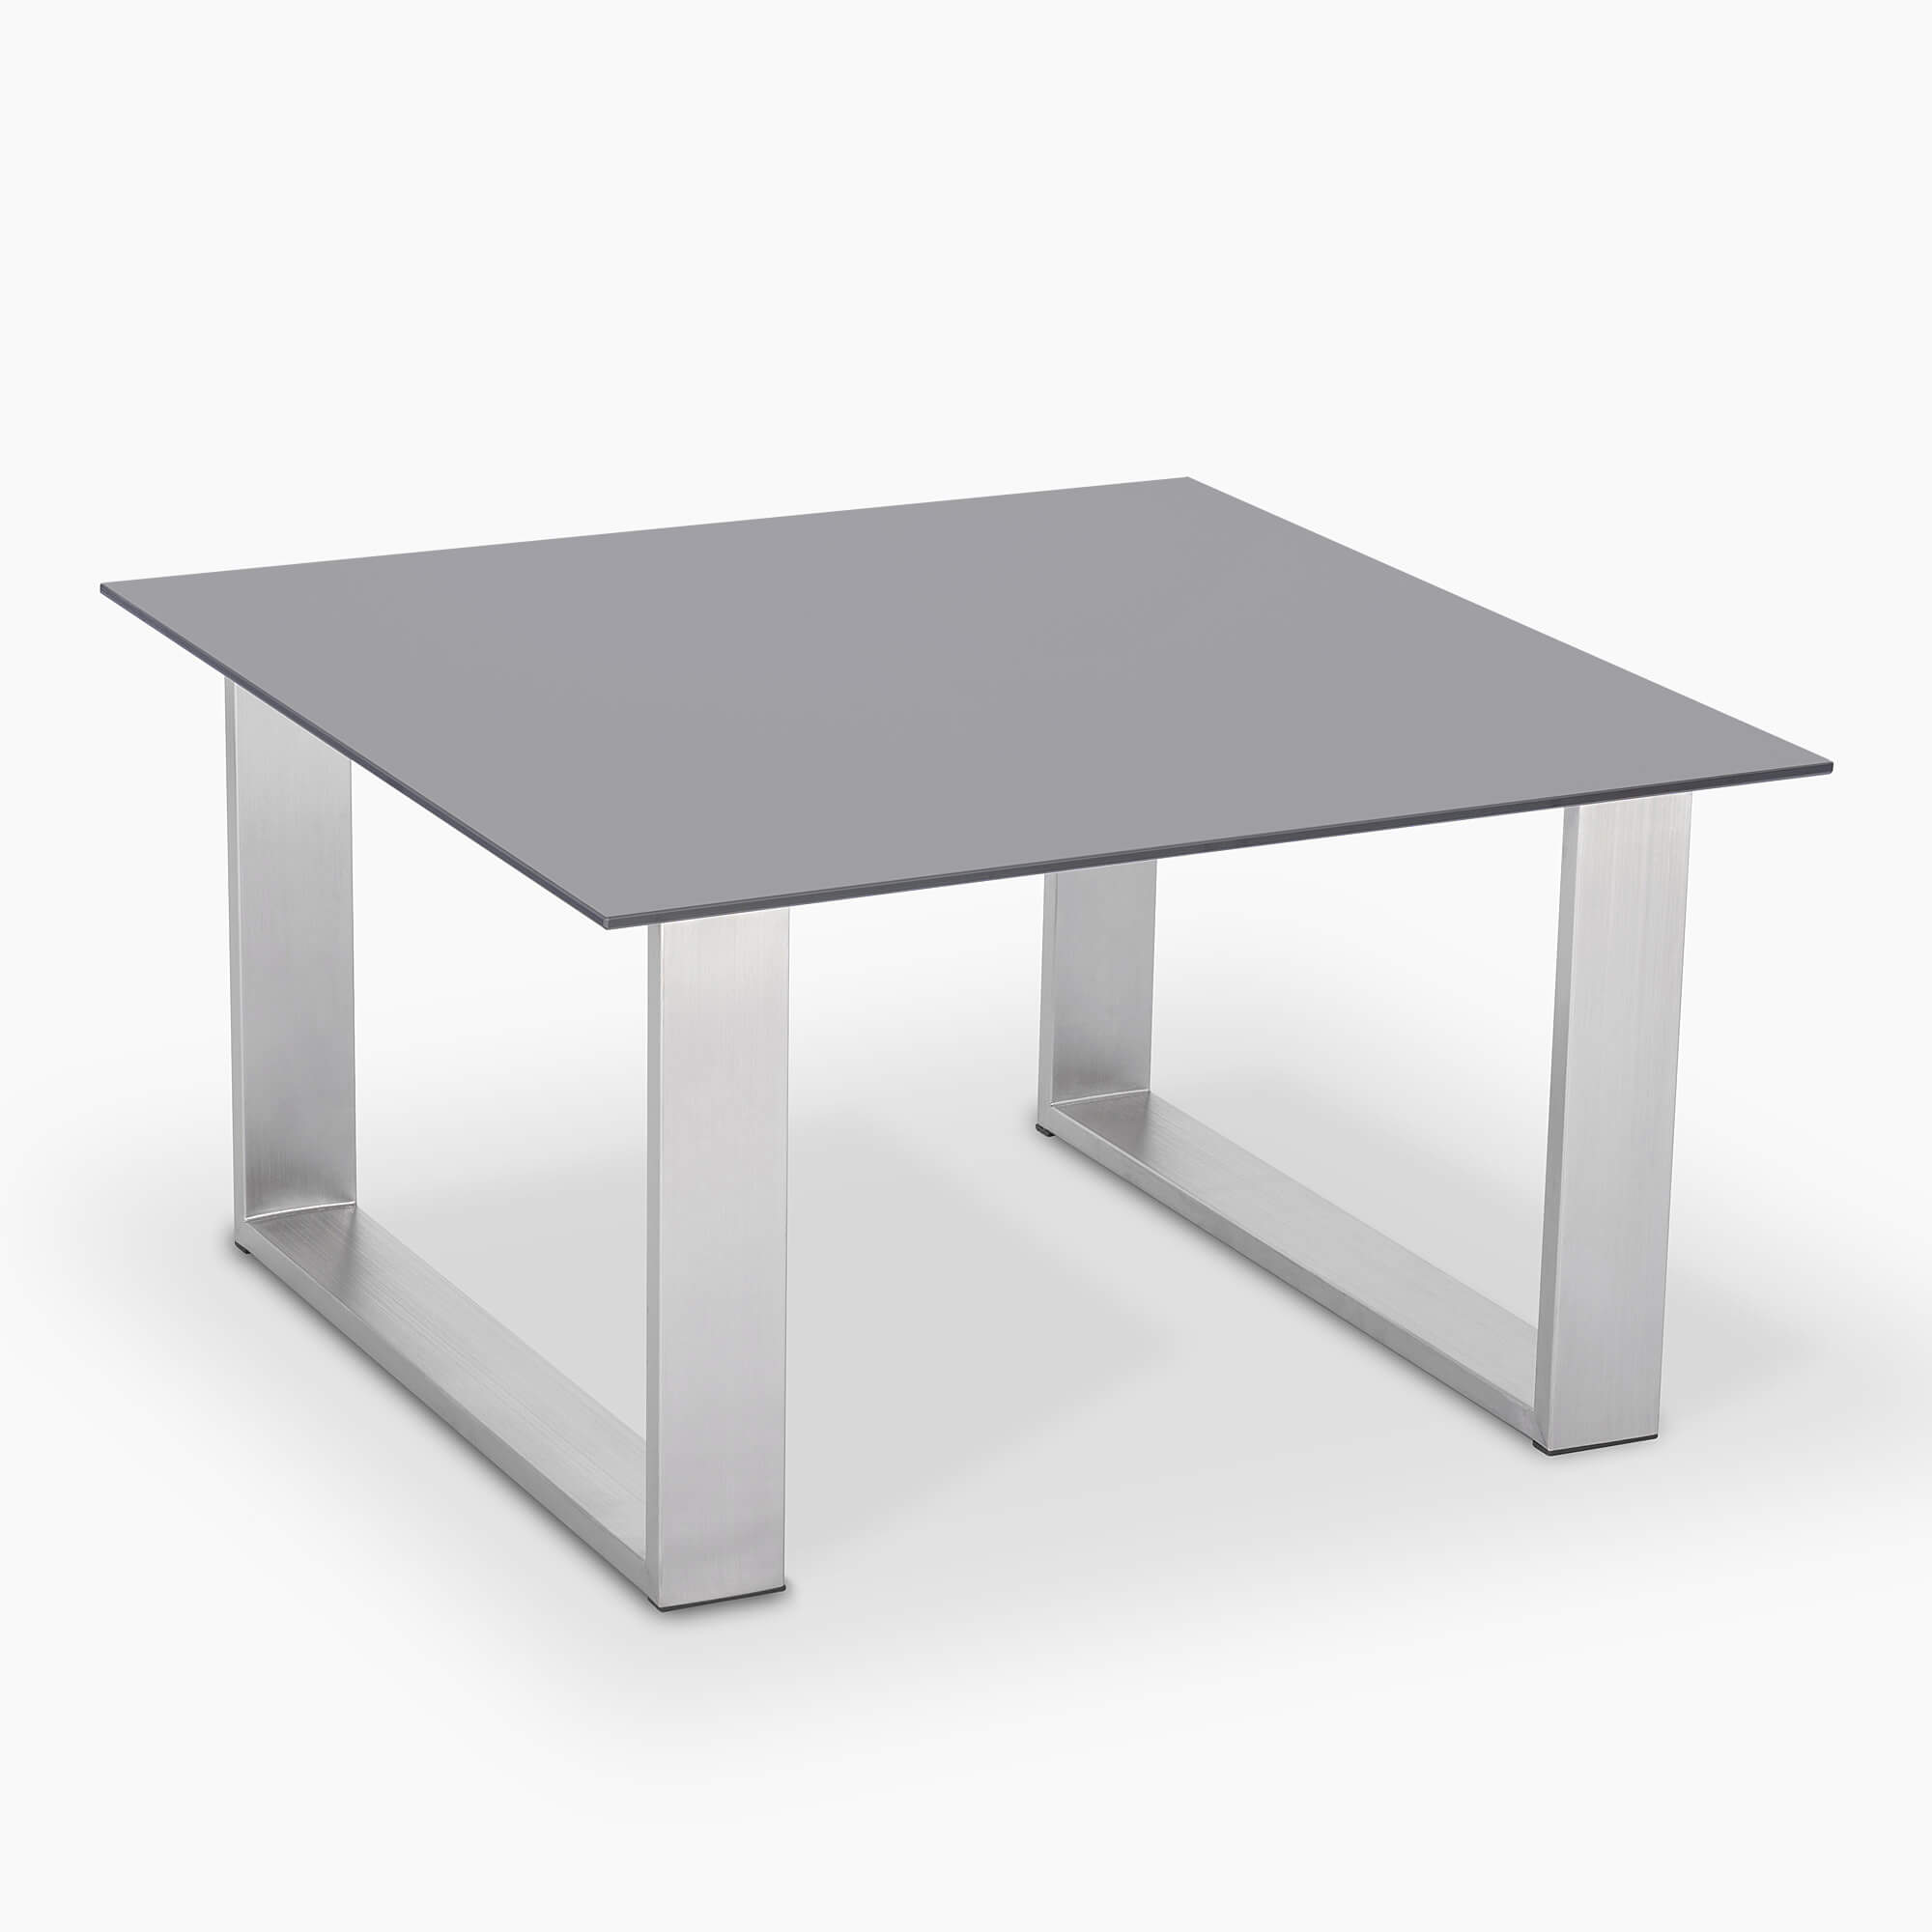 Light-grey-coffee-tables-square-metal-skids-stainless-steel-silver-janEven